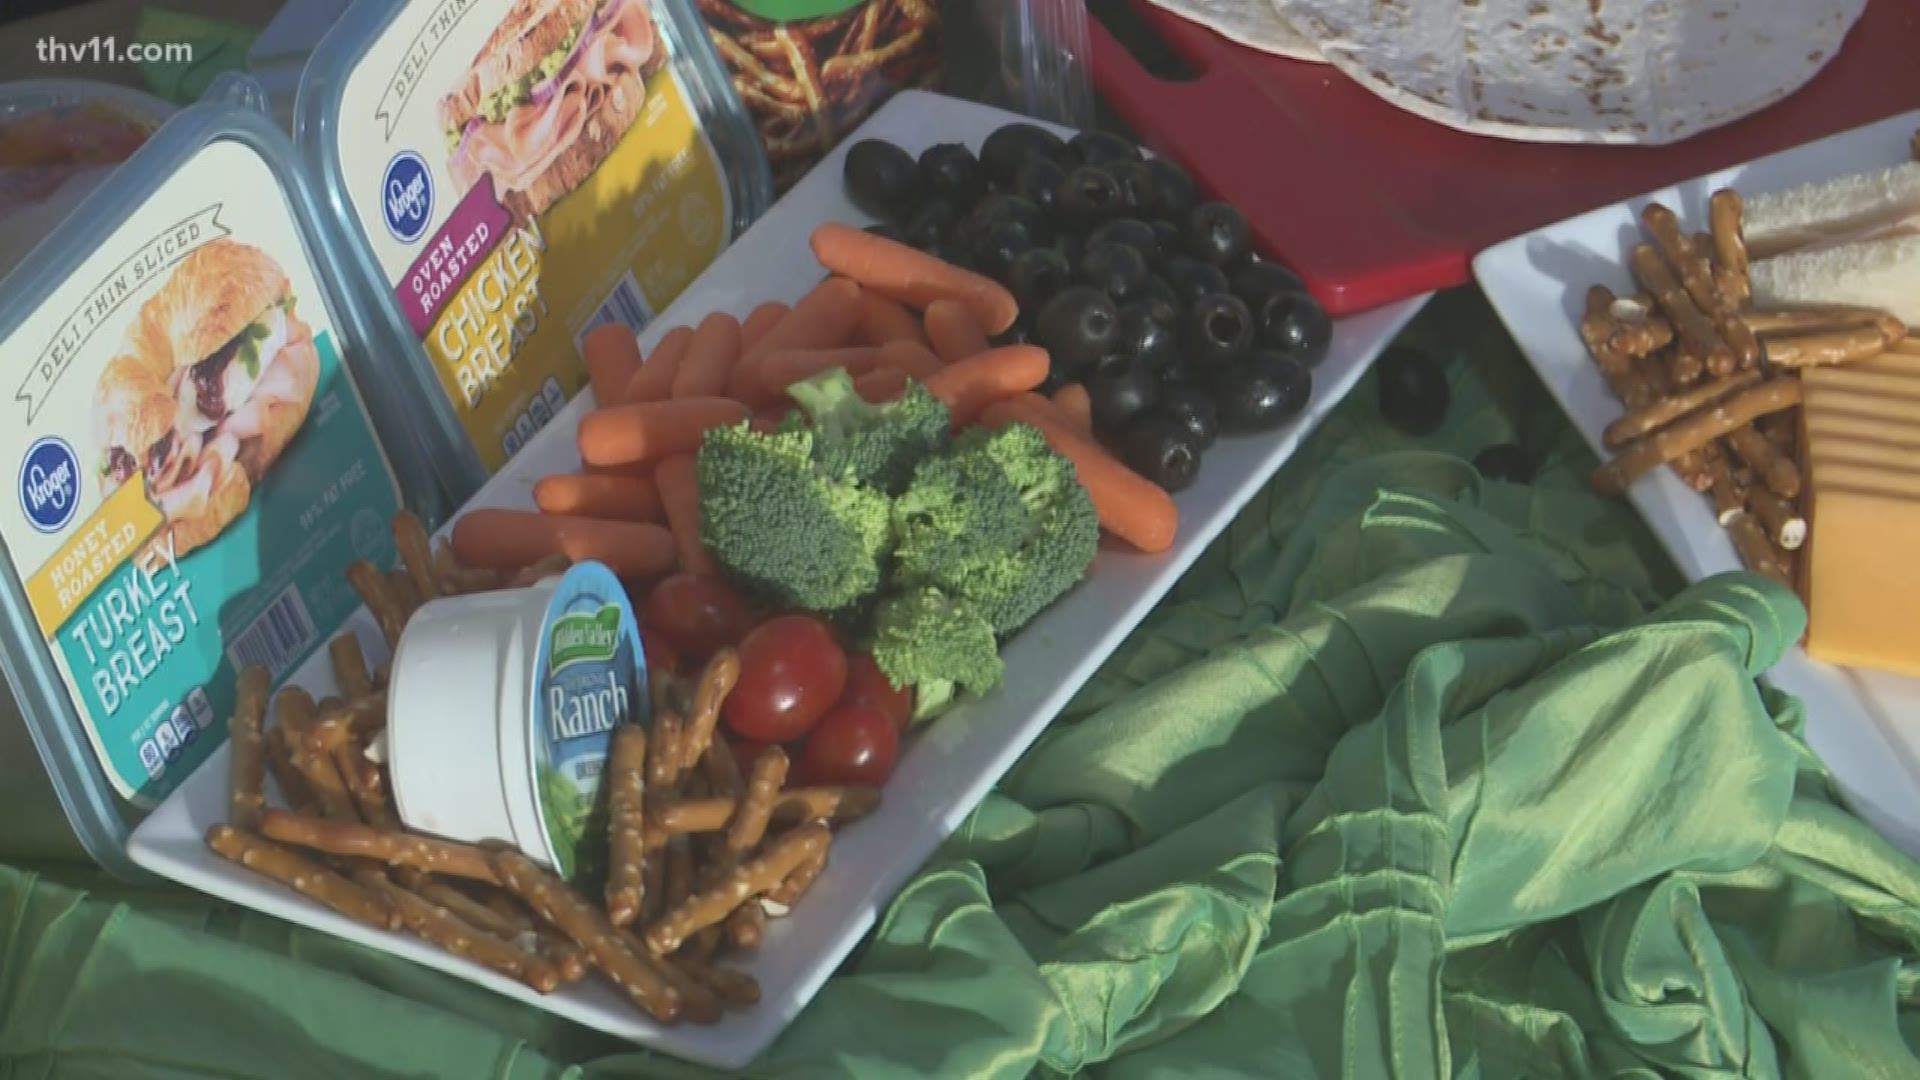 Making healthy lunches for kids is all about putting good ingredients together.